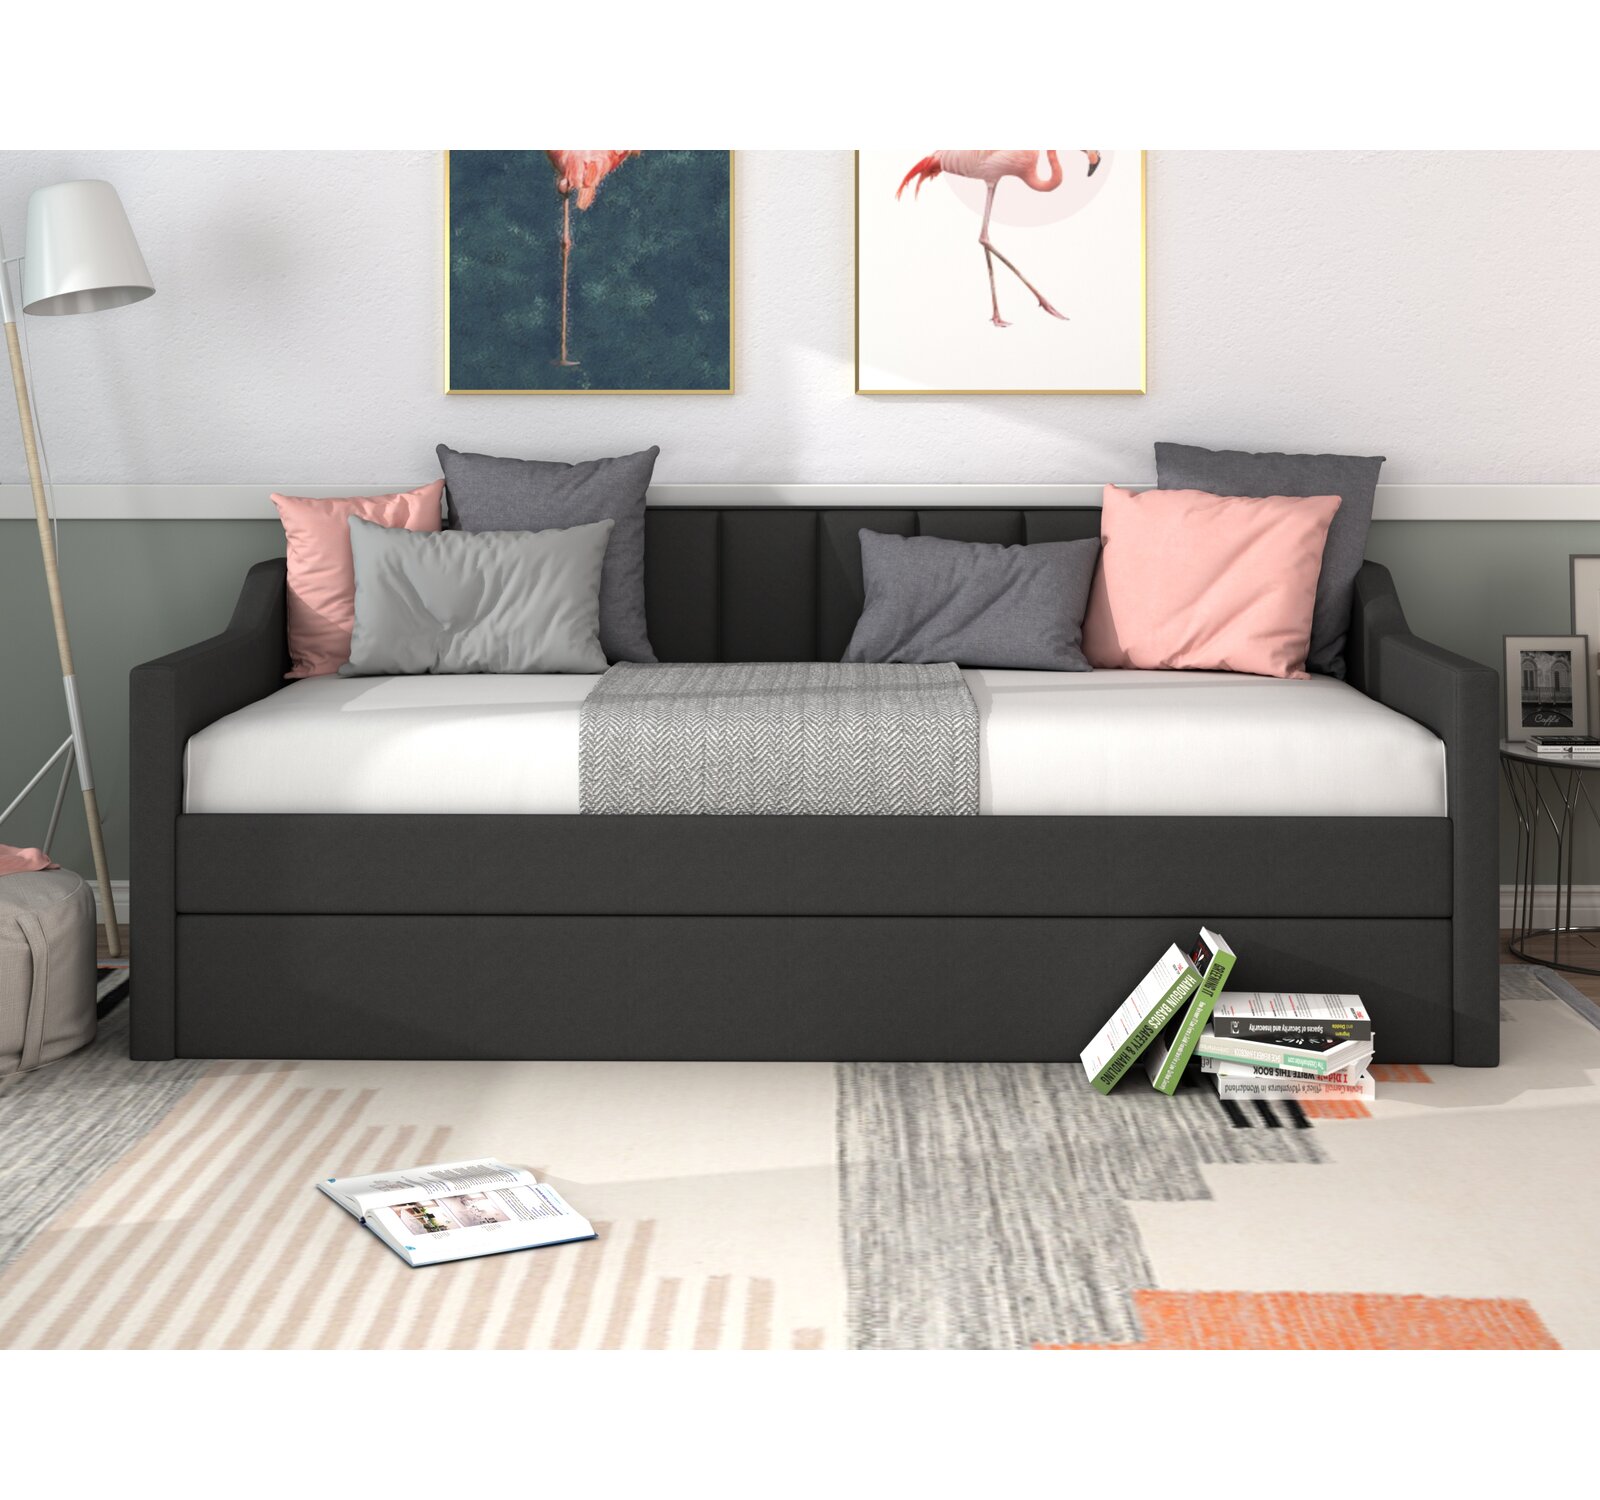 Everly Quinn Upholstered Daybed with Trundle